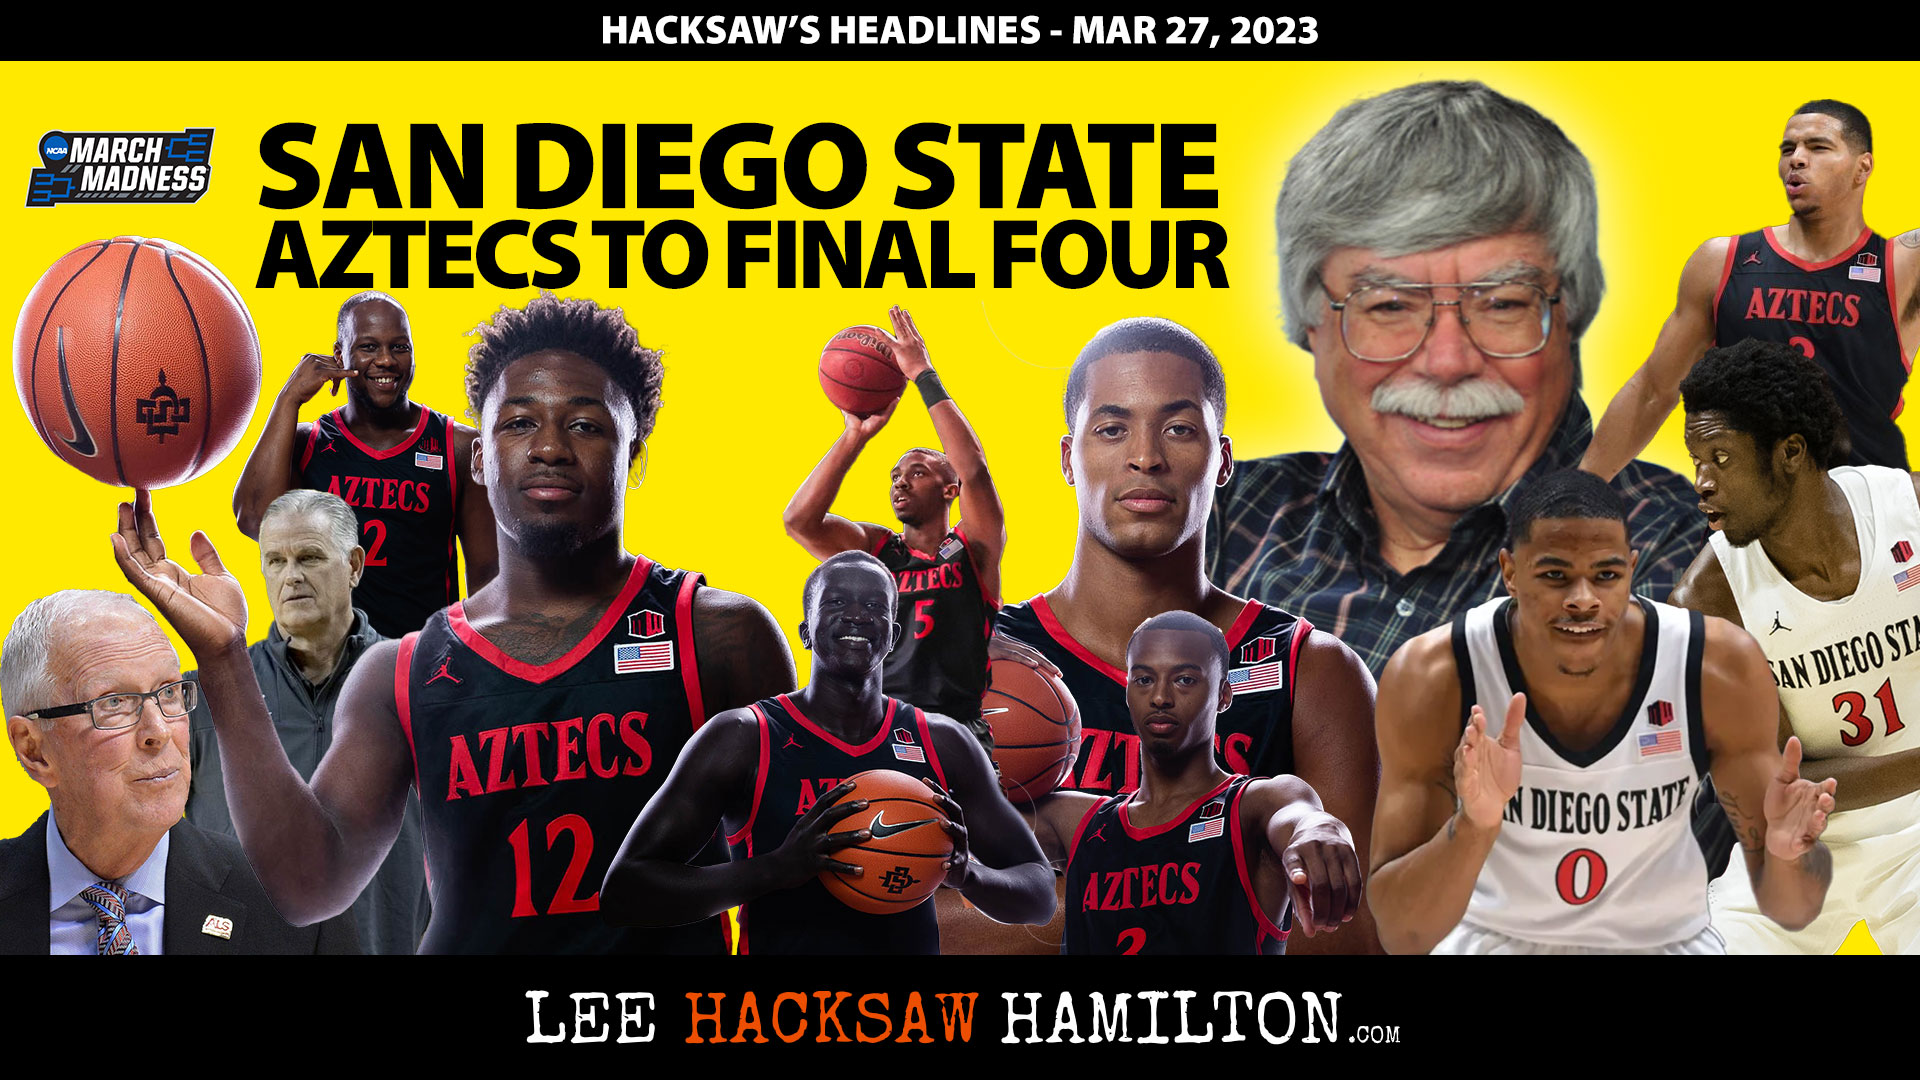 Lee Hacksaw Hamilton discusses the San Diego State Aztecs on their way to the Final Four